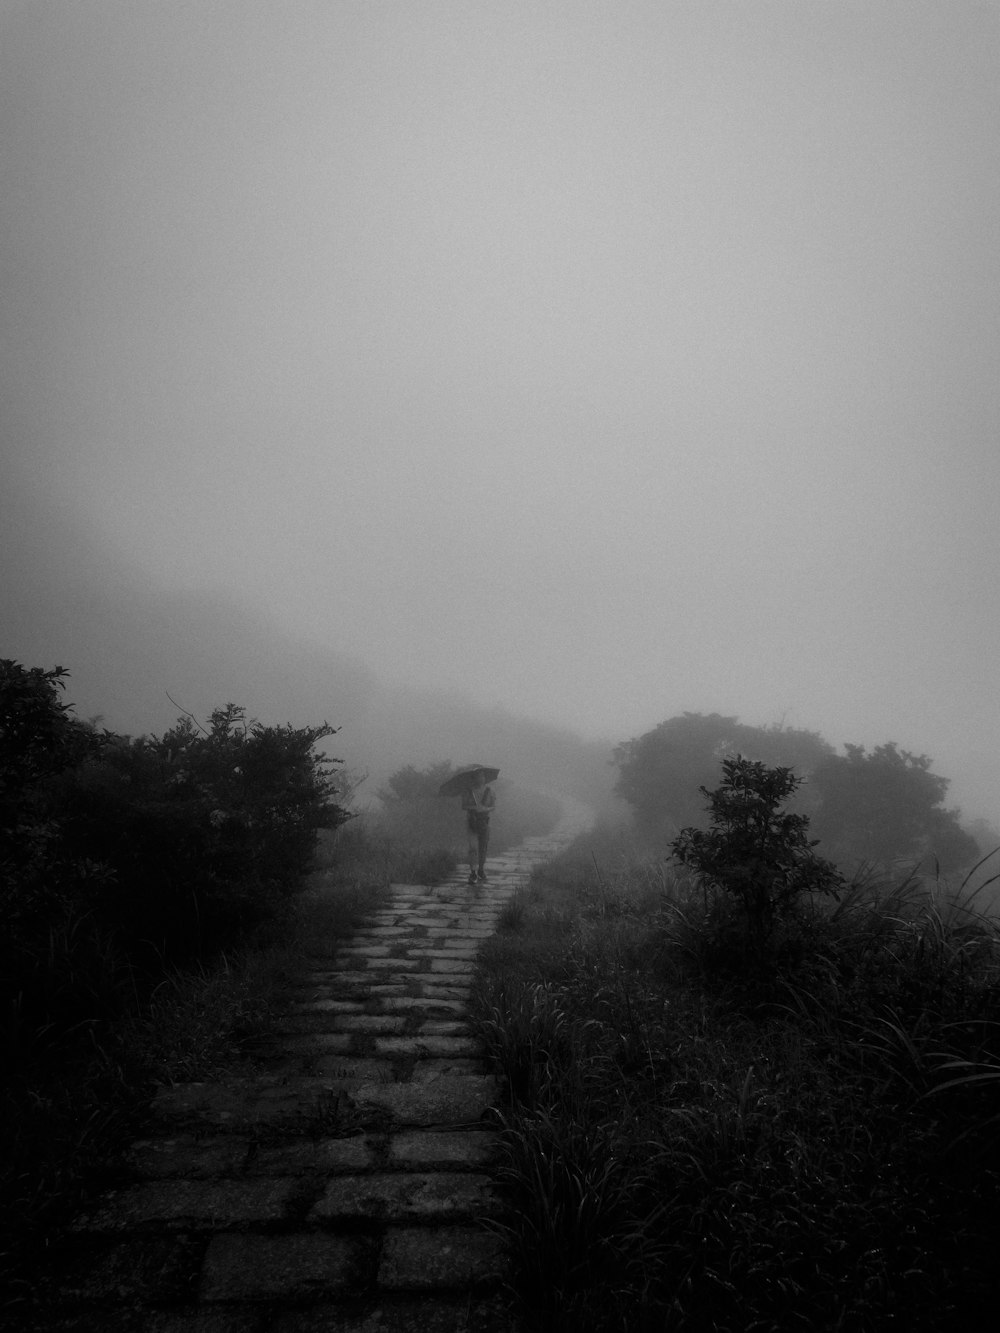 a black and white photo of a person walking on a foggy path